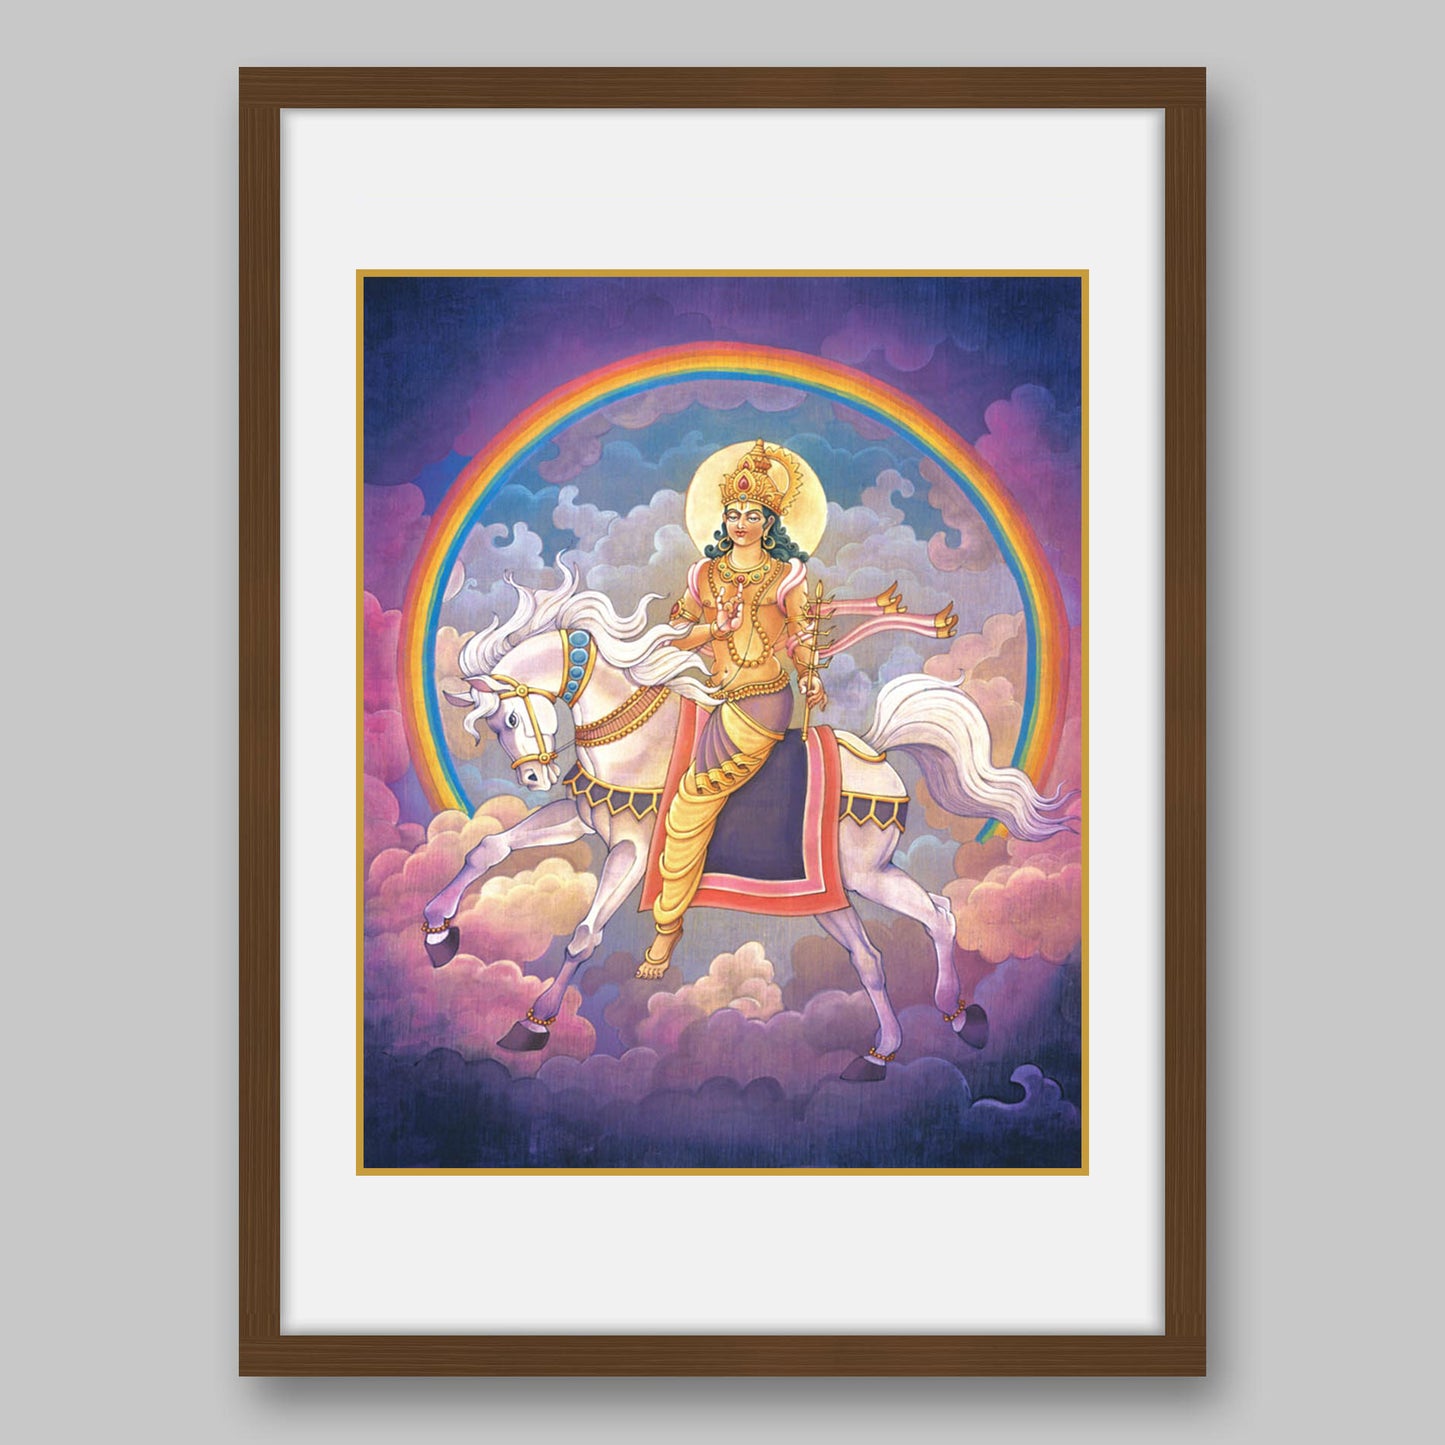 Indra – High Quality Print of Artwork by Pieter Weltevrede